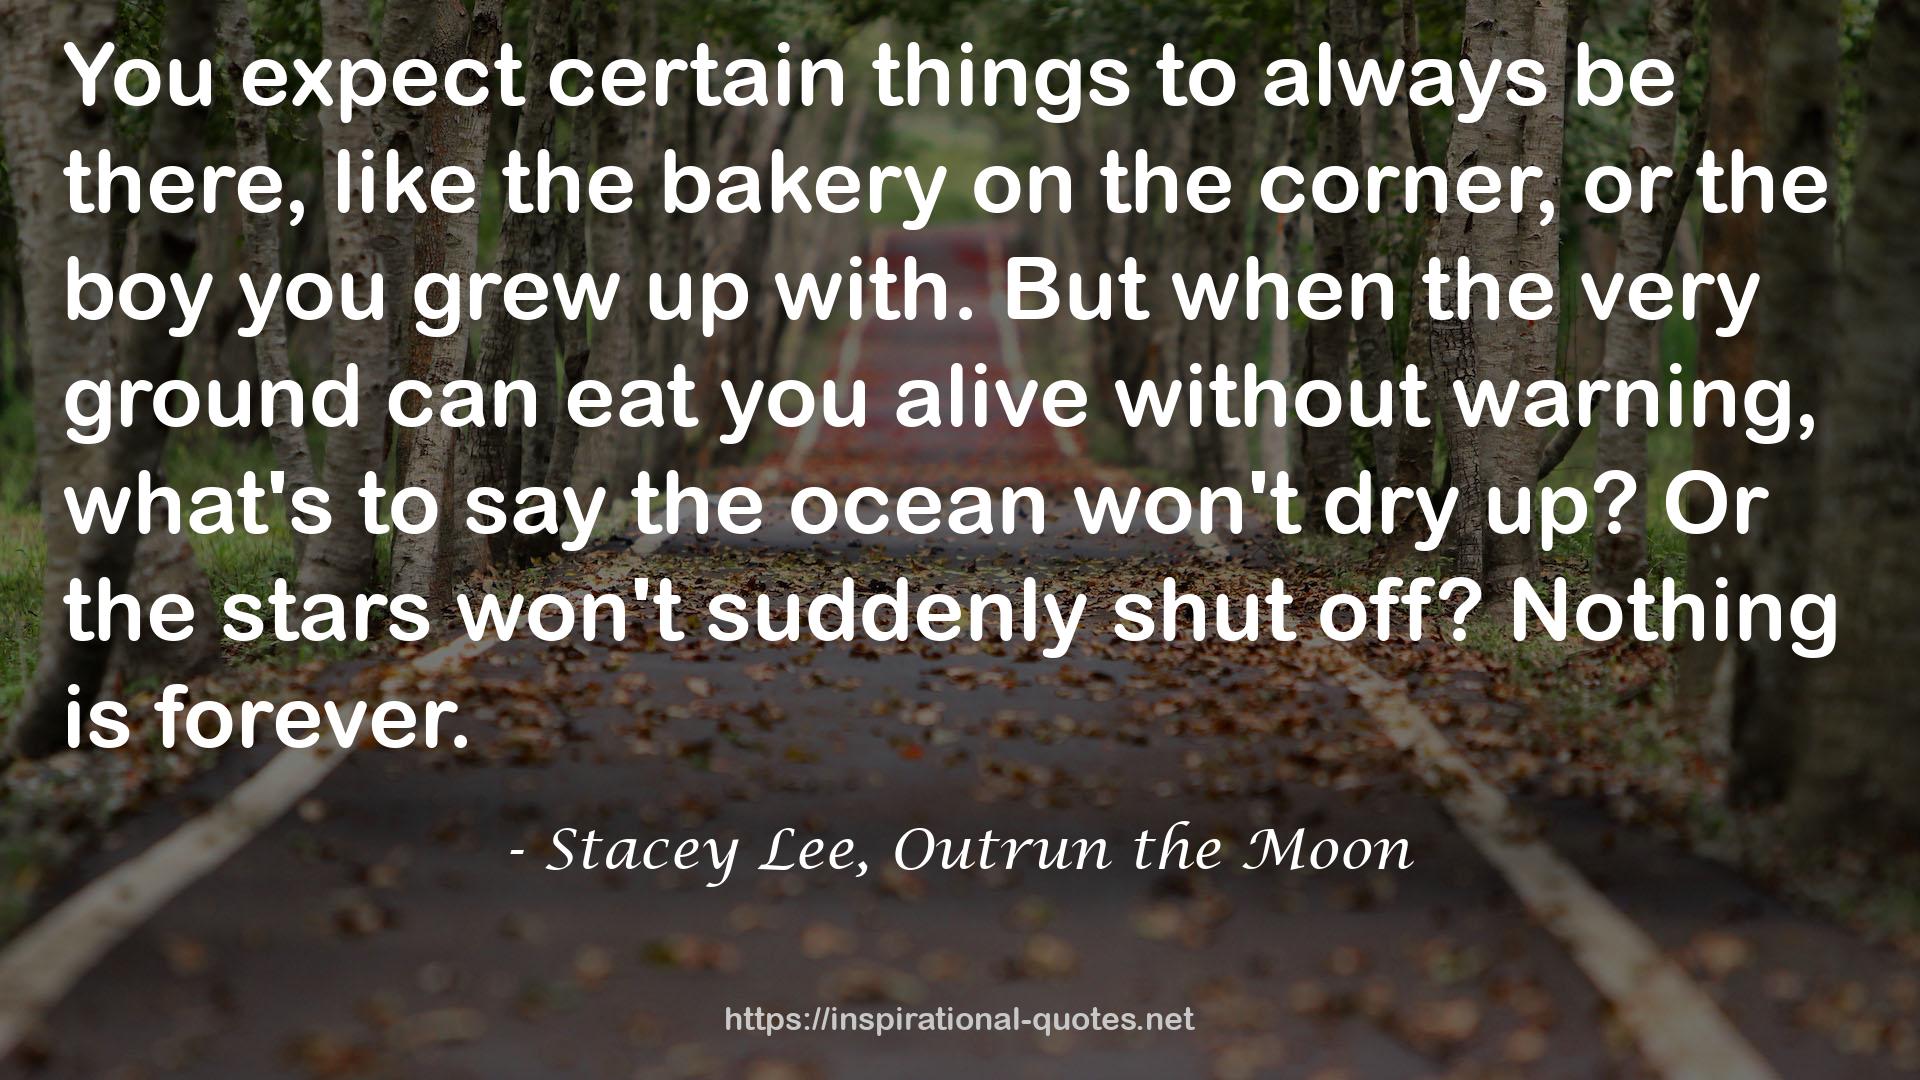 Stacey Lee, Outrun the Moon QUOTES